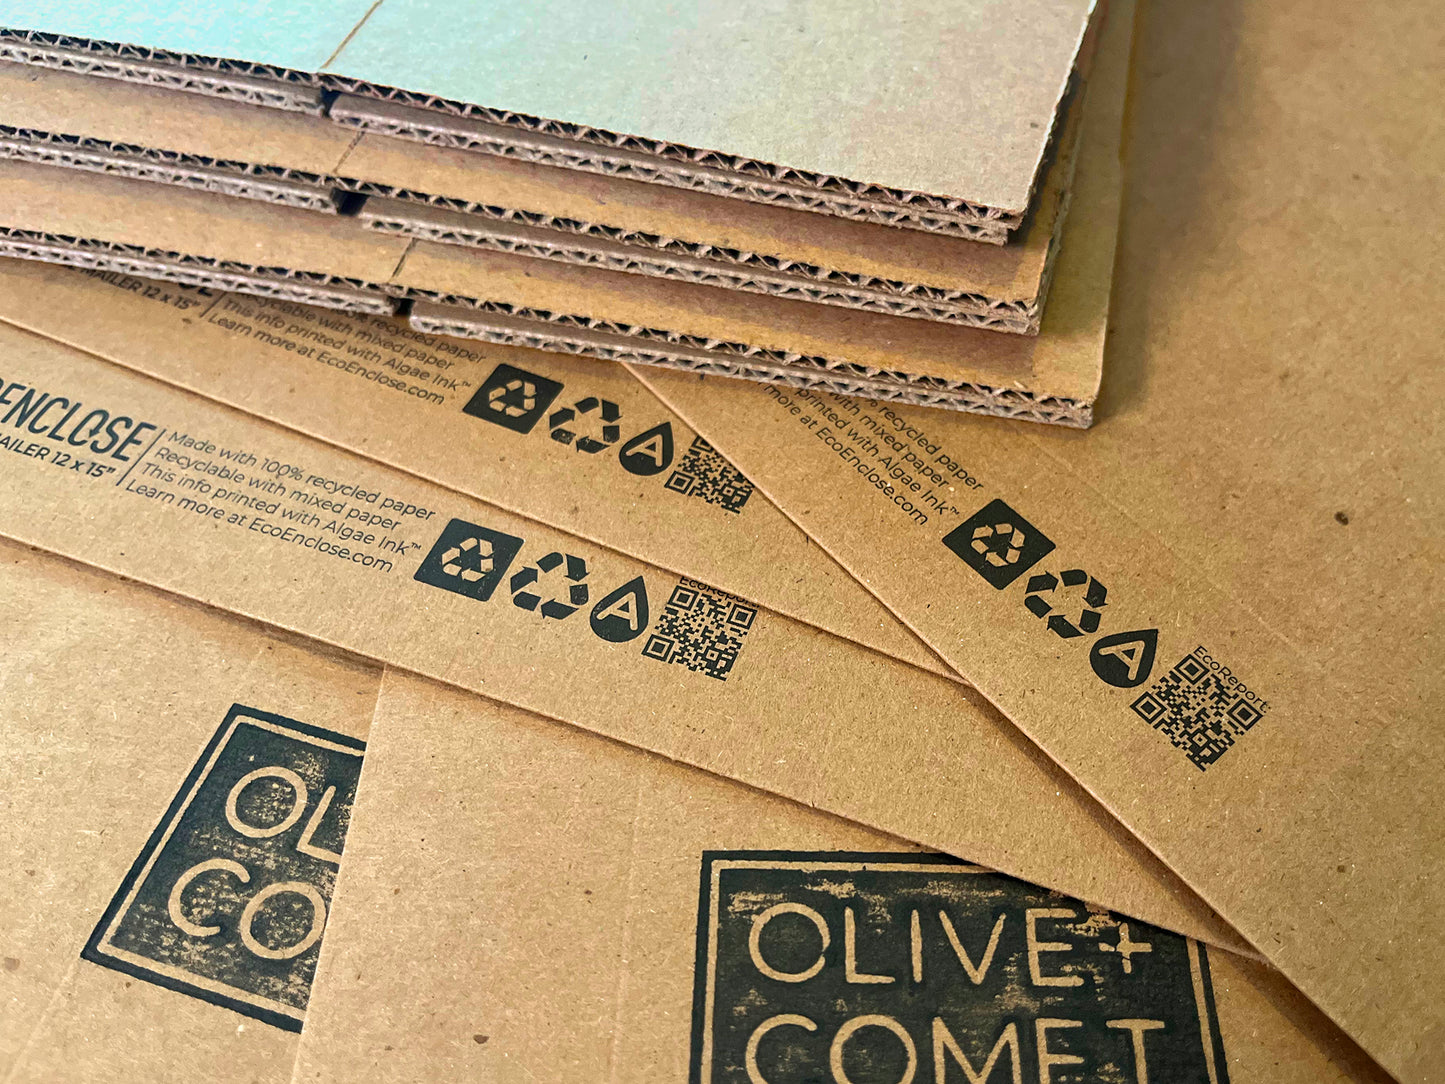 Photo of Olive+Comet recycled packaging shown spread out.